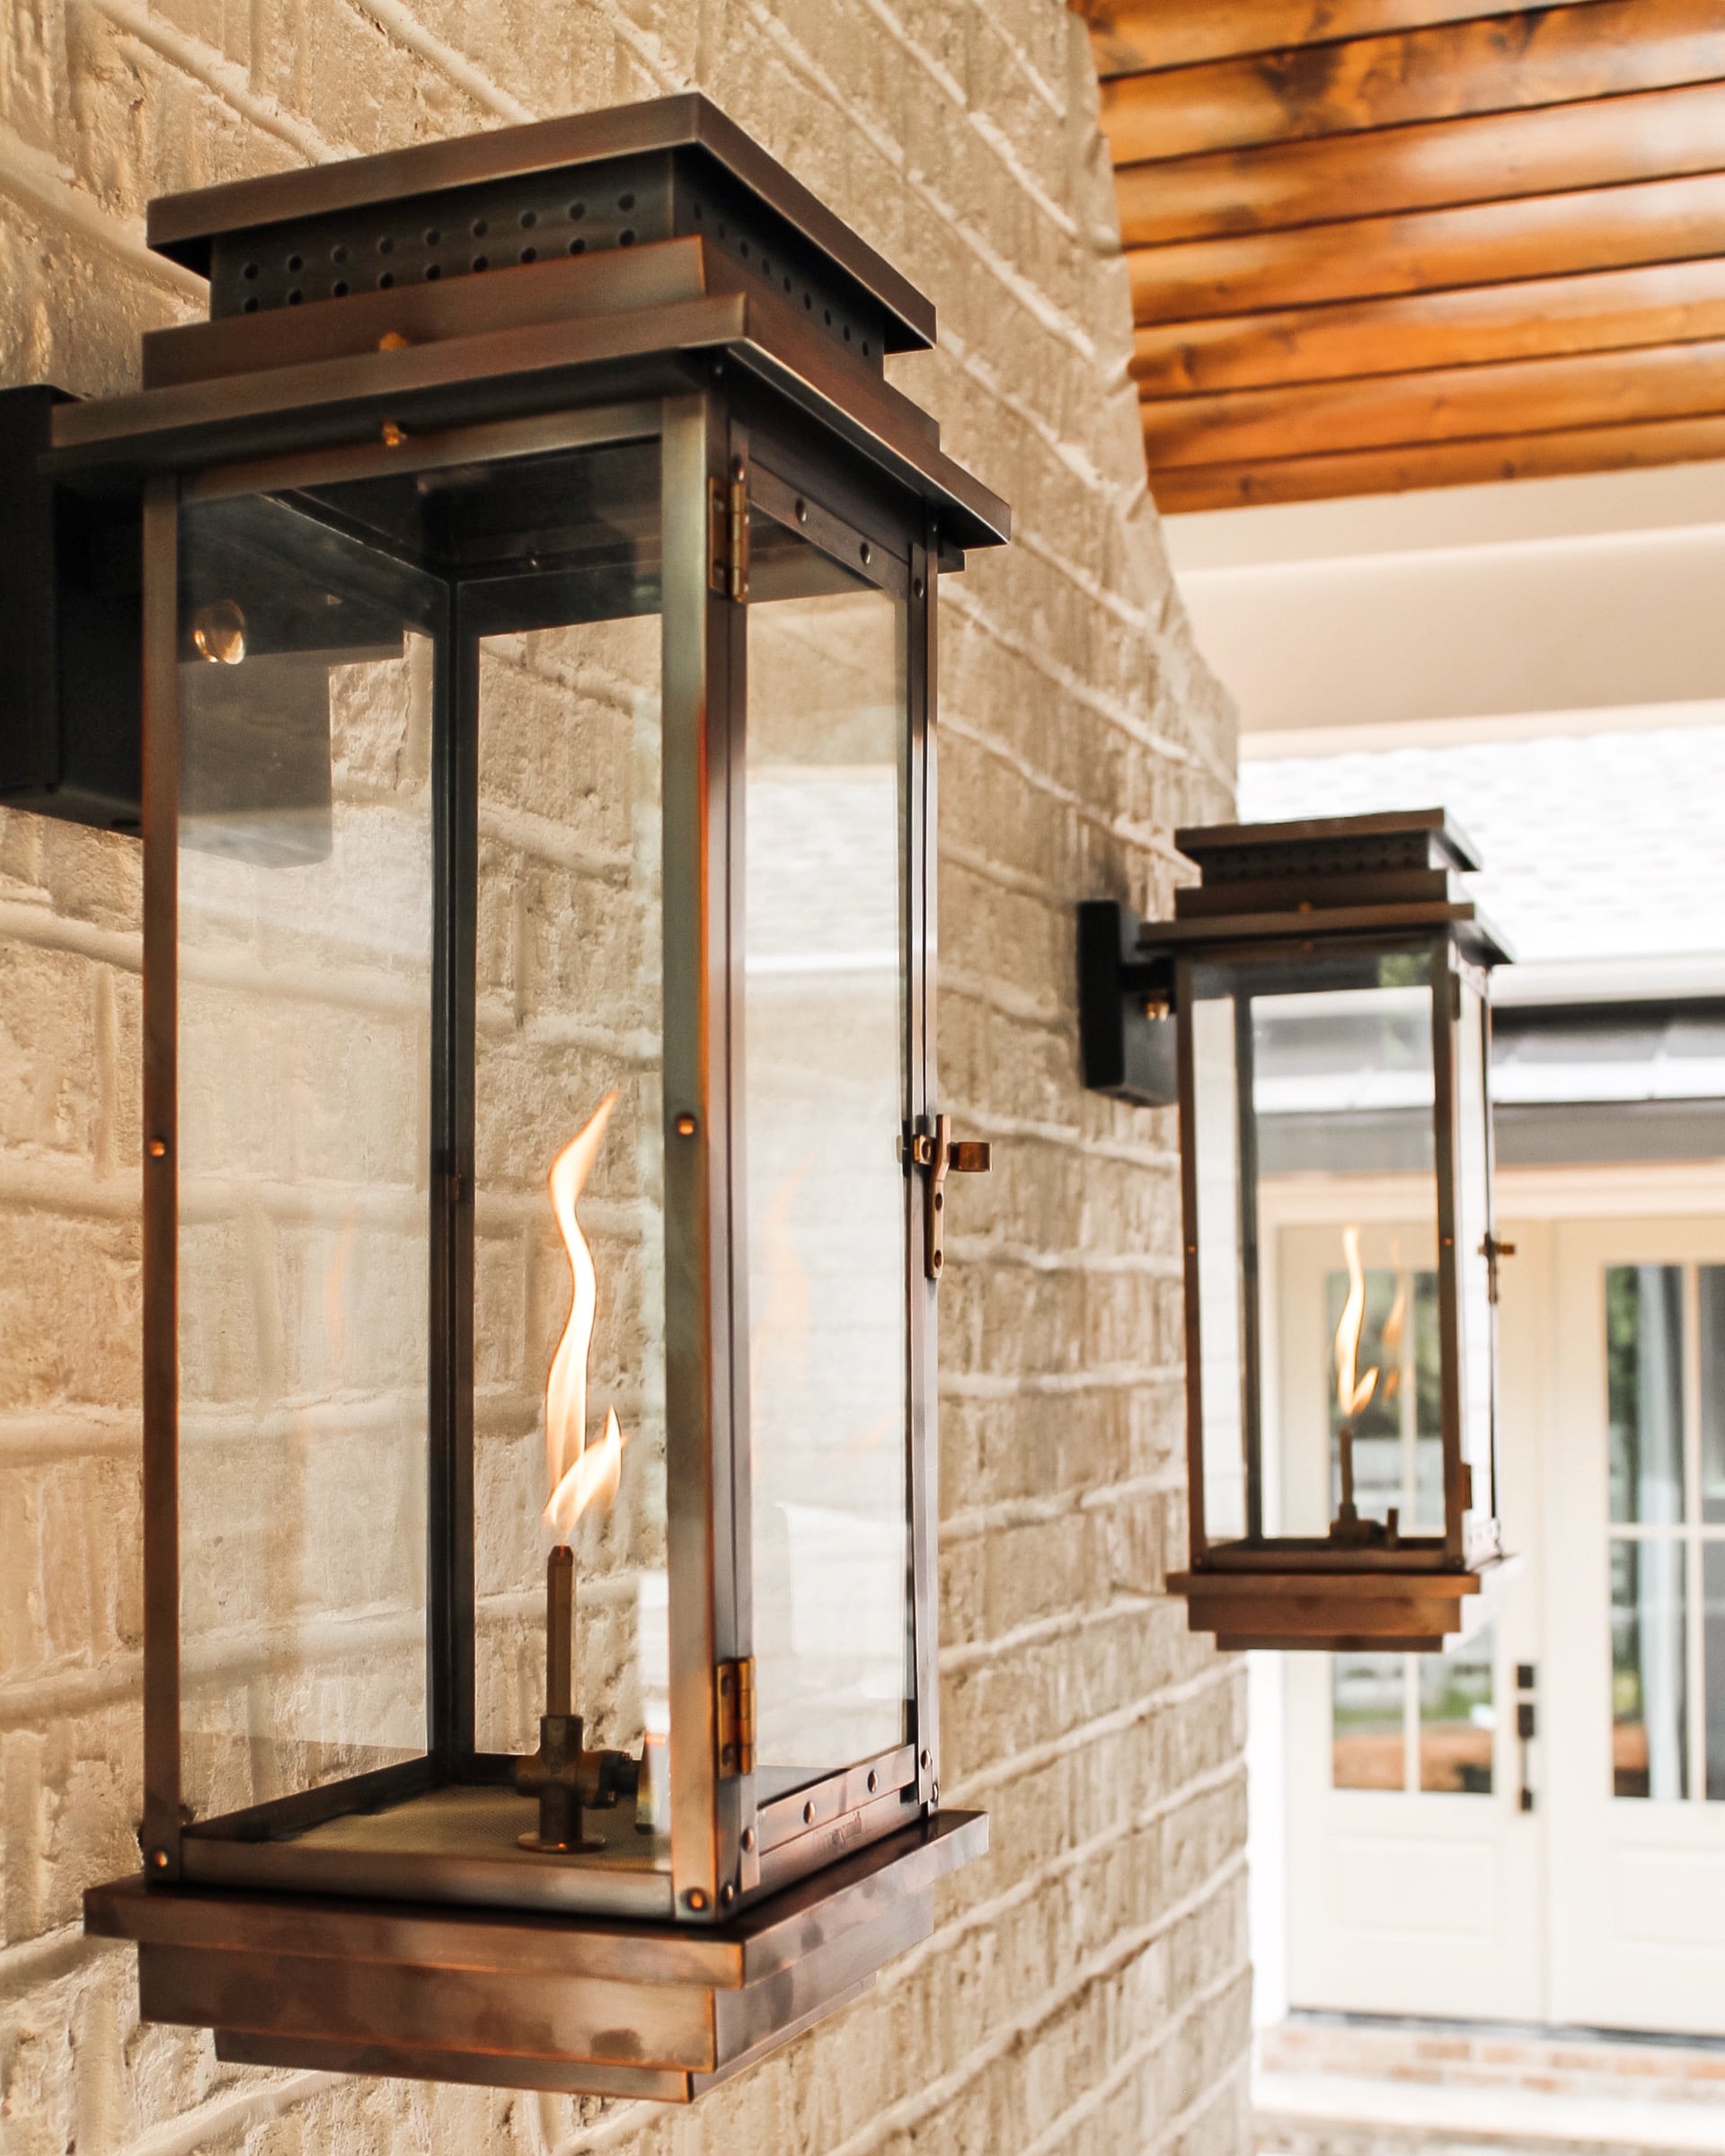 Stylize Your Home’s Outdoor Spaces with Handcrafted Copper Gas Light Lanterns